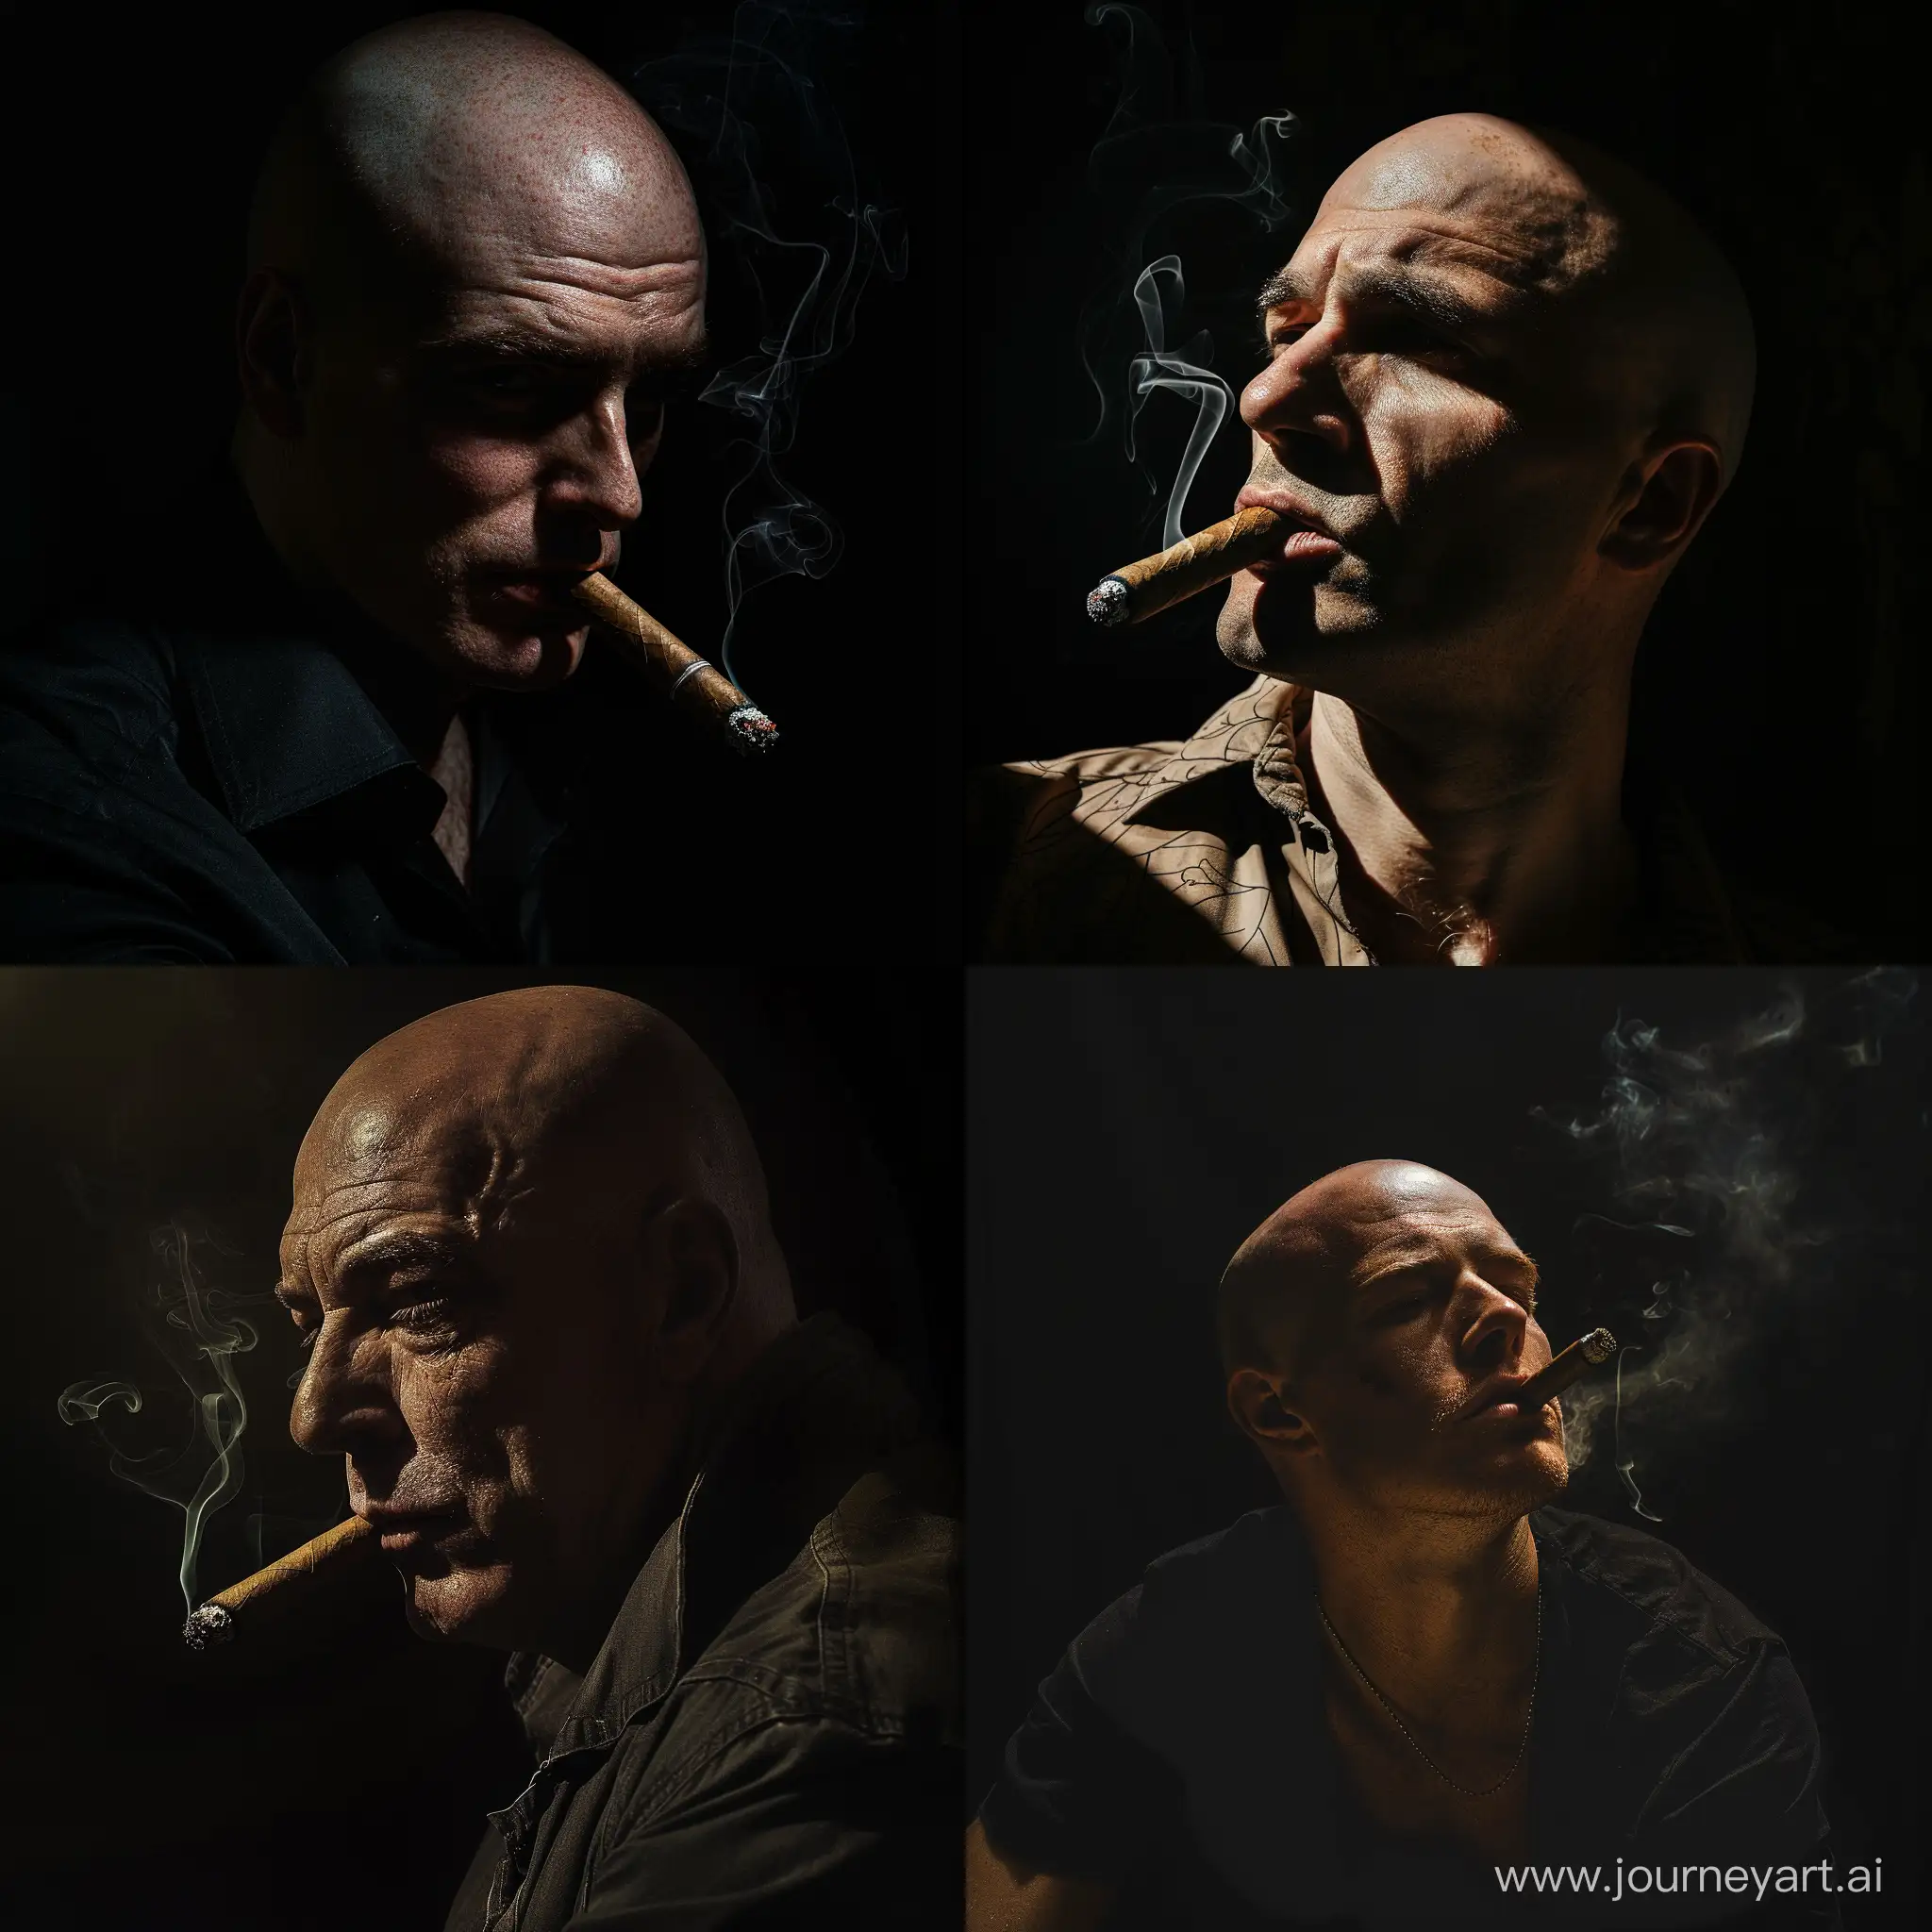 portrait photograph of a bald handsome, Absorbing chiaroscuro shot of bald man, half in light, stromg shadows, mysterious,immersed in shadows, smoking a cigar on black background. minimalistic and Hyper realistic style


